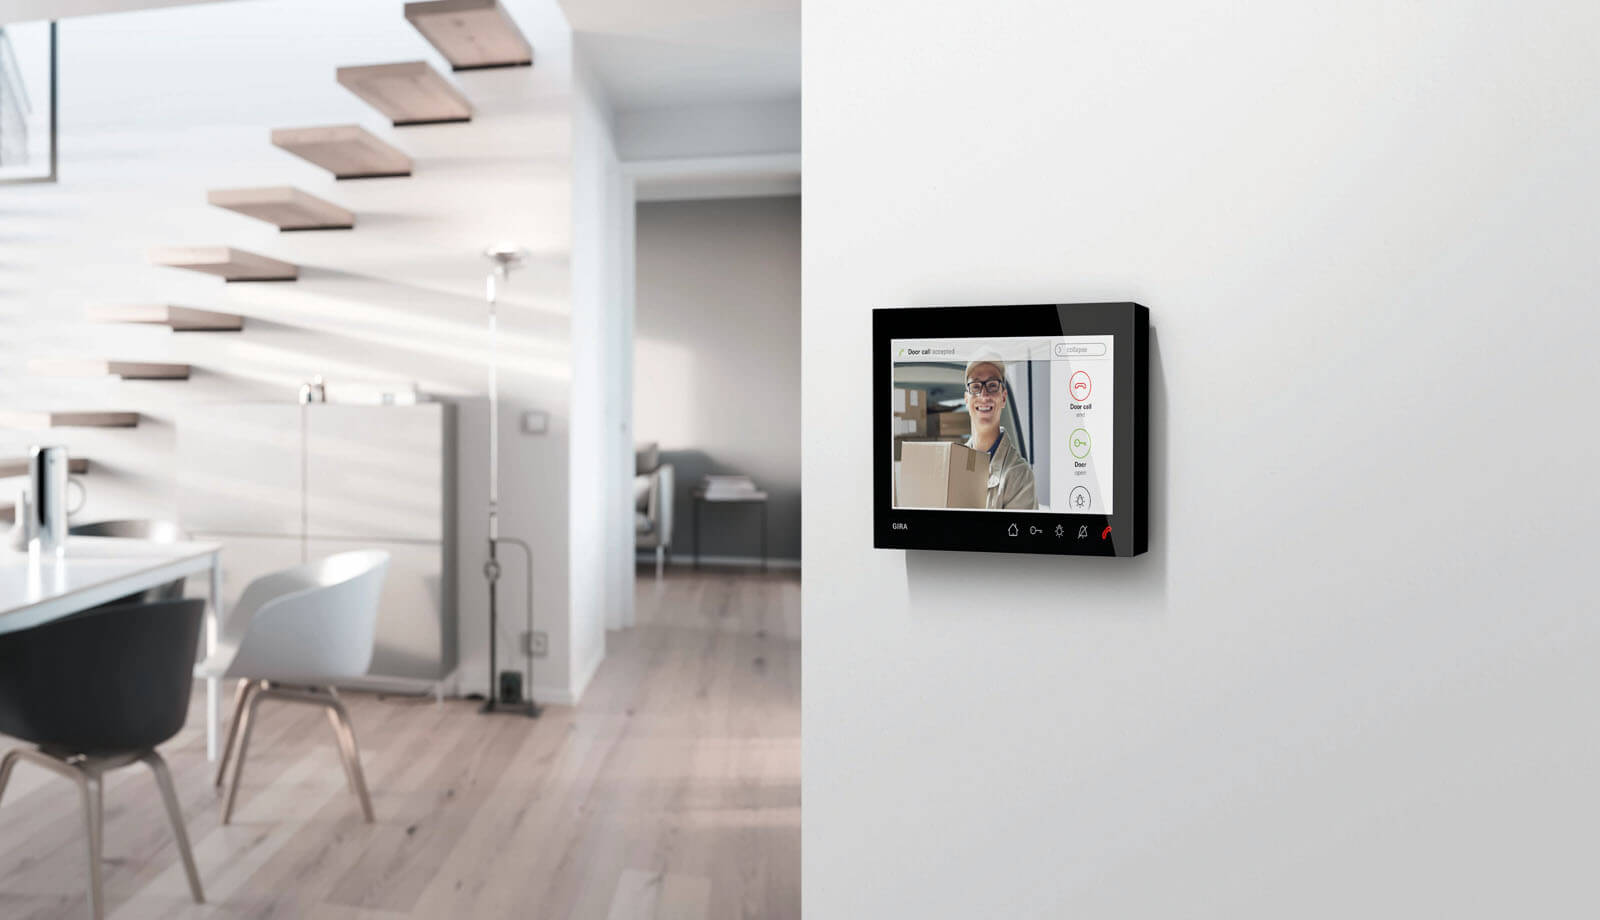 The Gira surface-mounted video home station 7: high-resolution display for clear communication. Available in 2 colours.